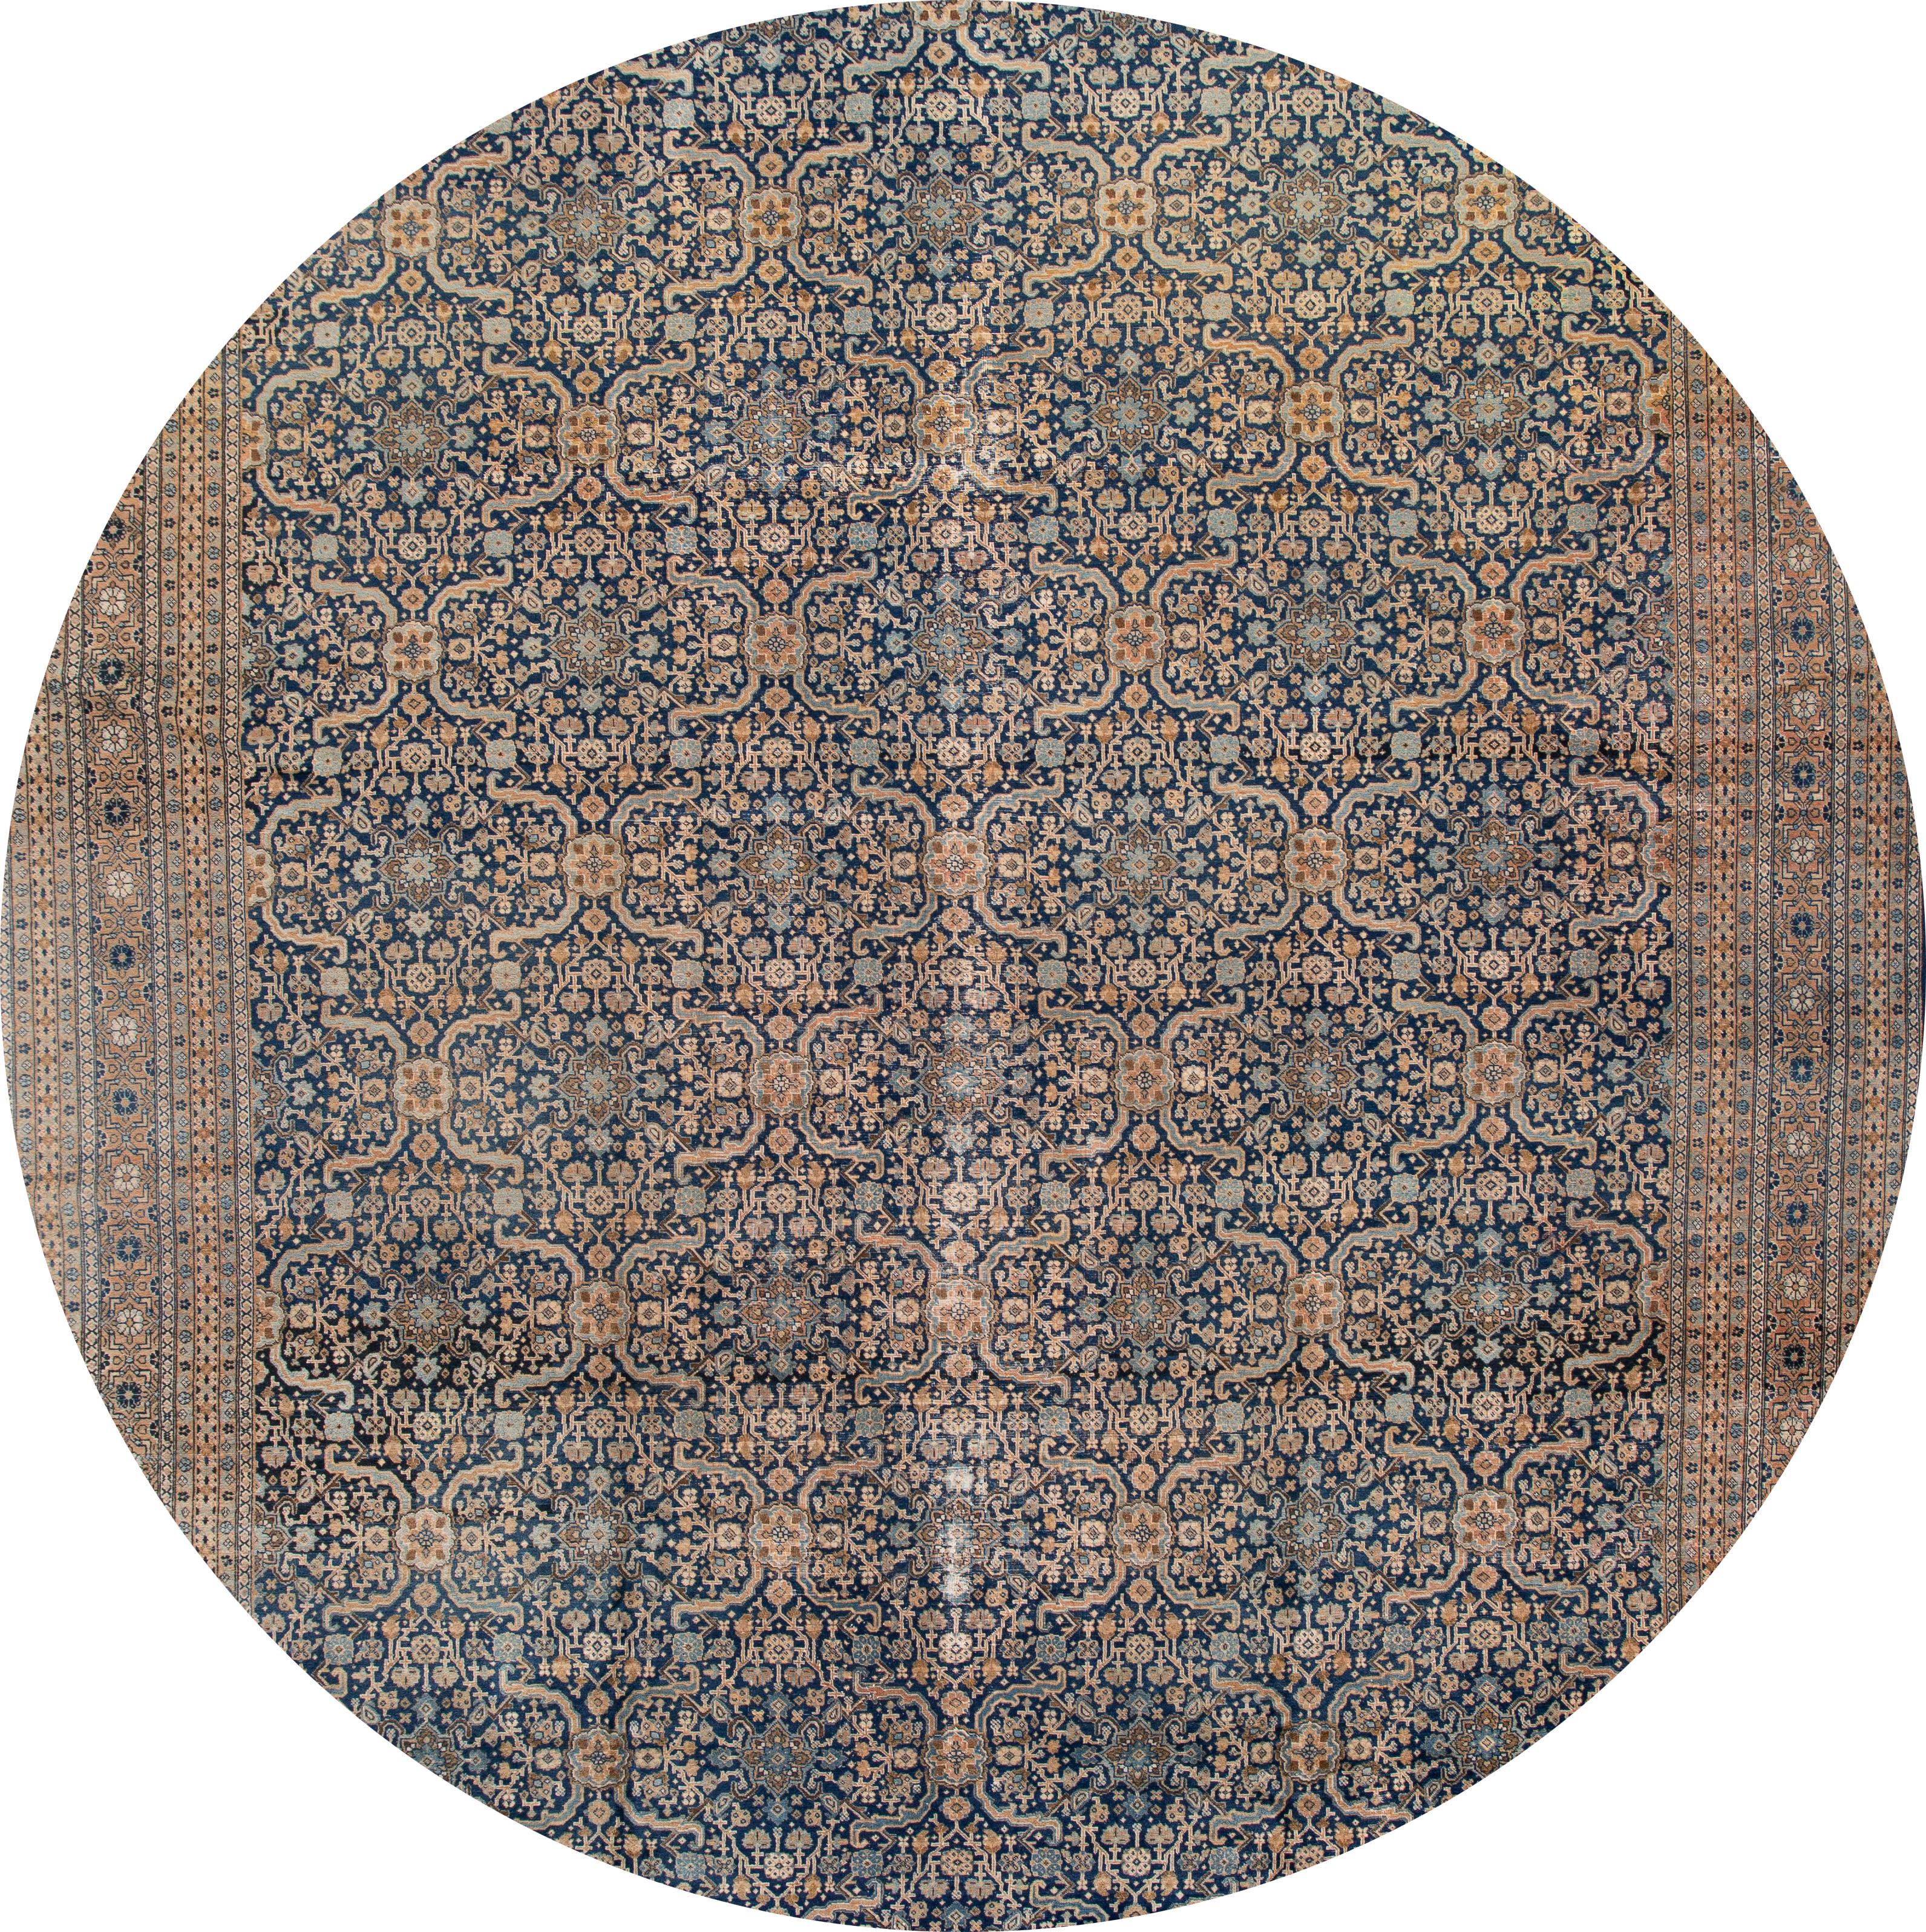 Beautiful antique oversize Tabriz rug, hand knotted wool with a blue field, tan and light blue frame and accents in an all-over design.
This rug measures 12' x 19'.